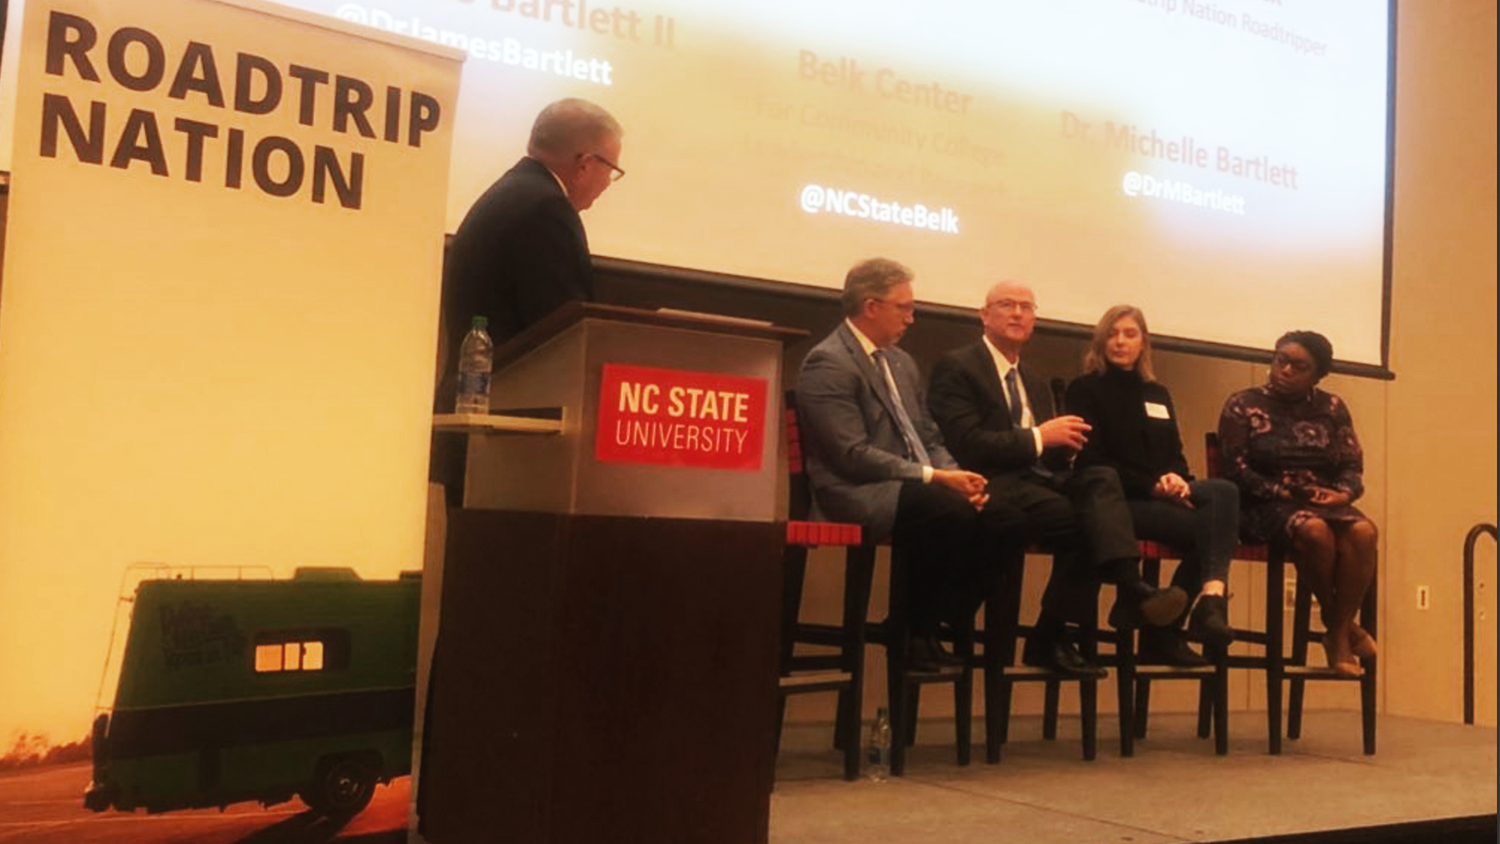 A panel discussion followed a screening of One Step Closer at the NC State College of Education